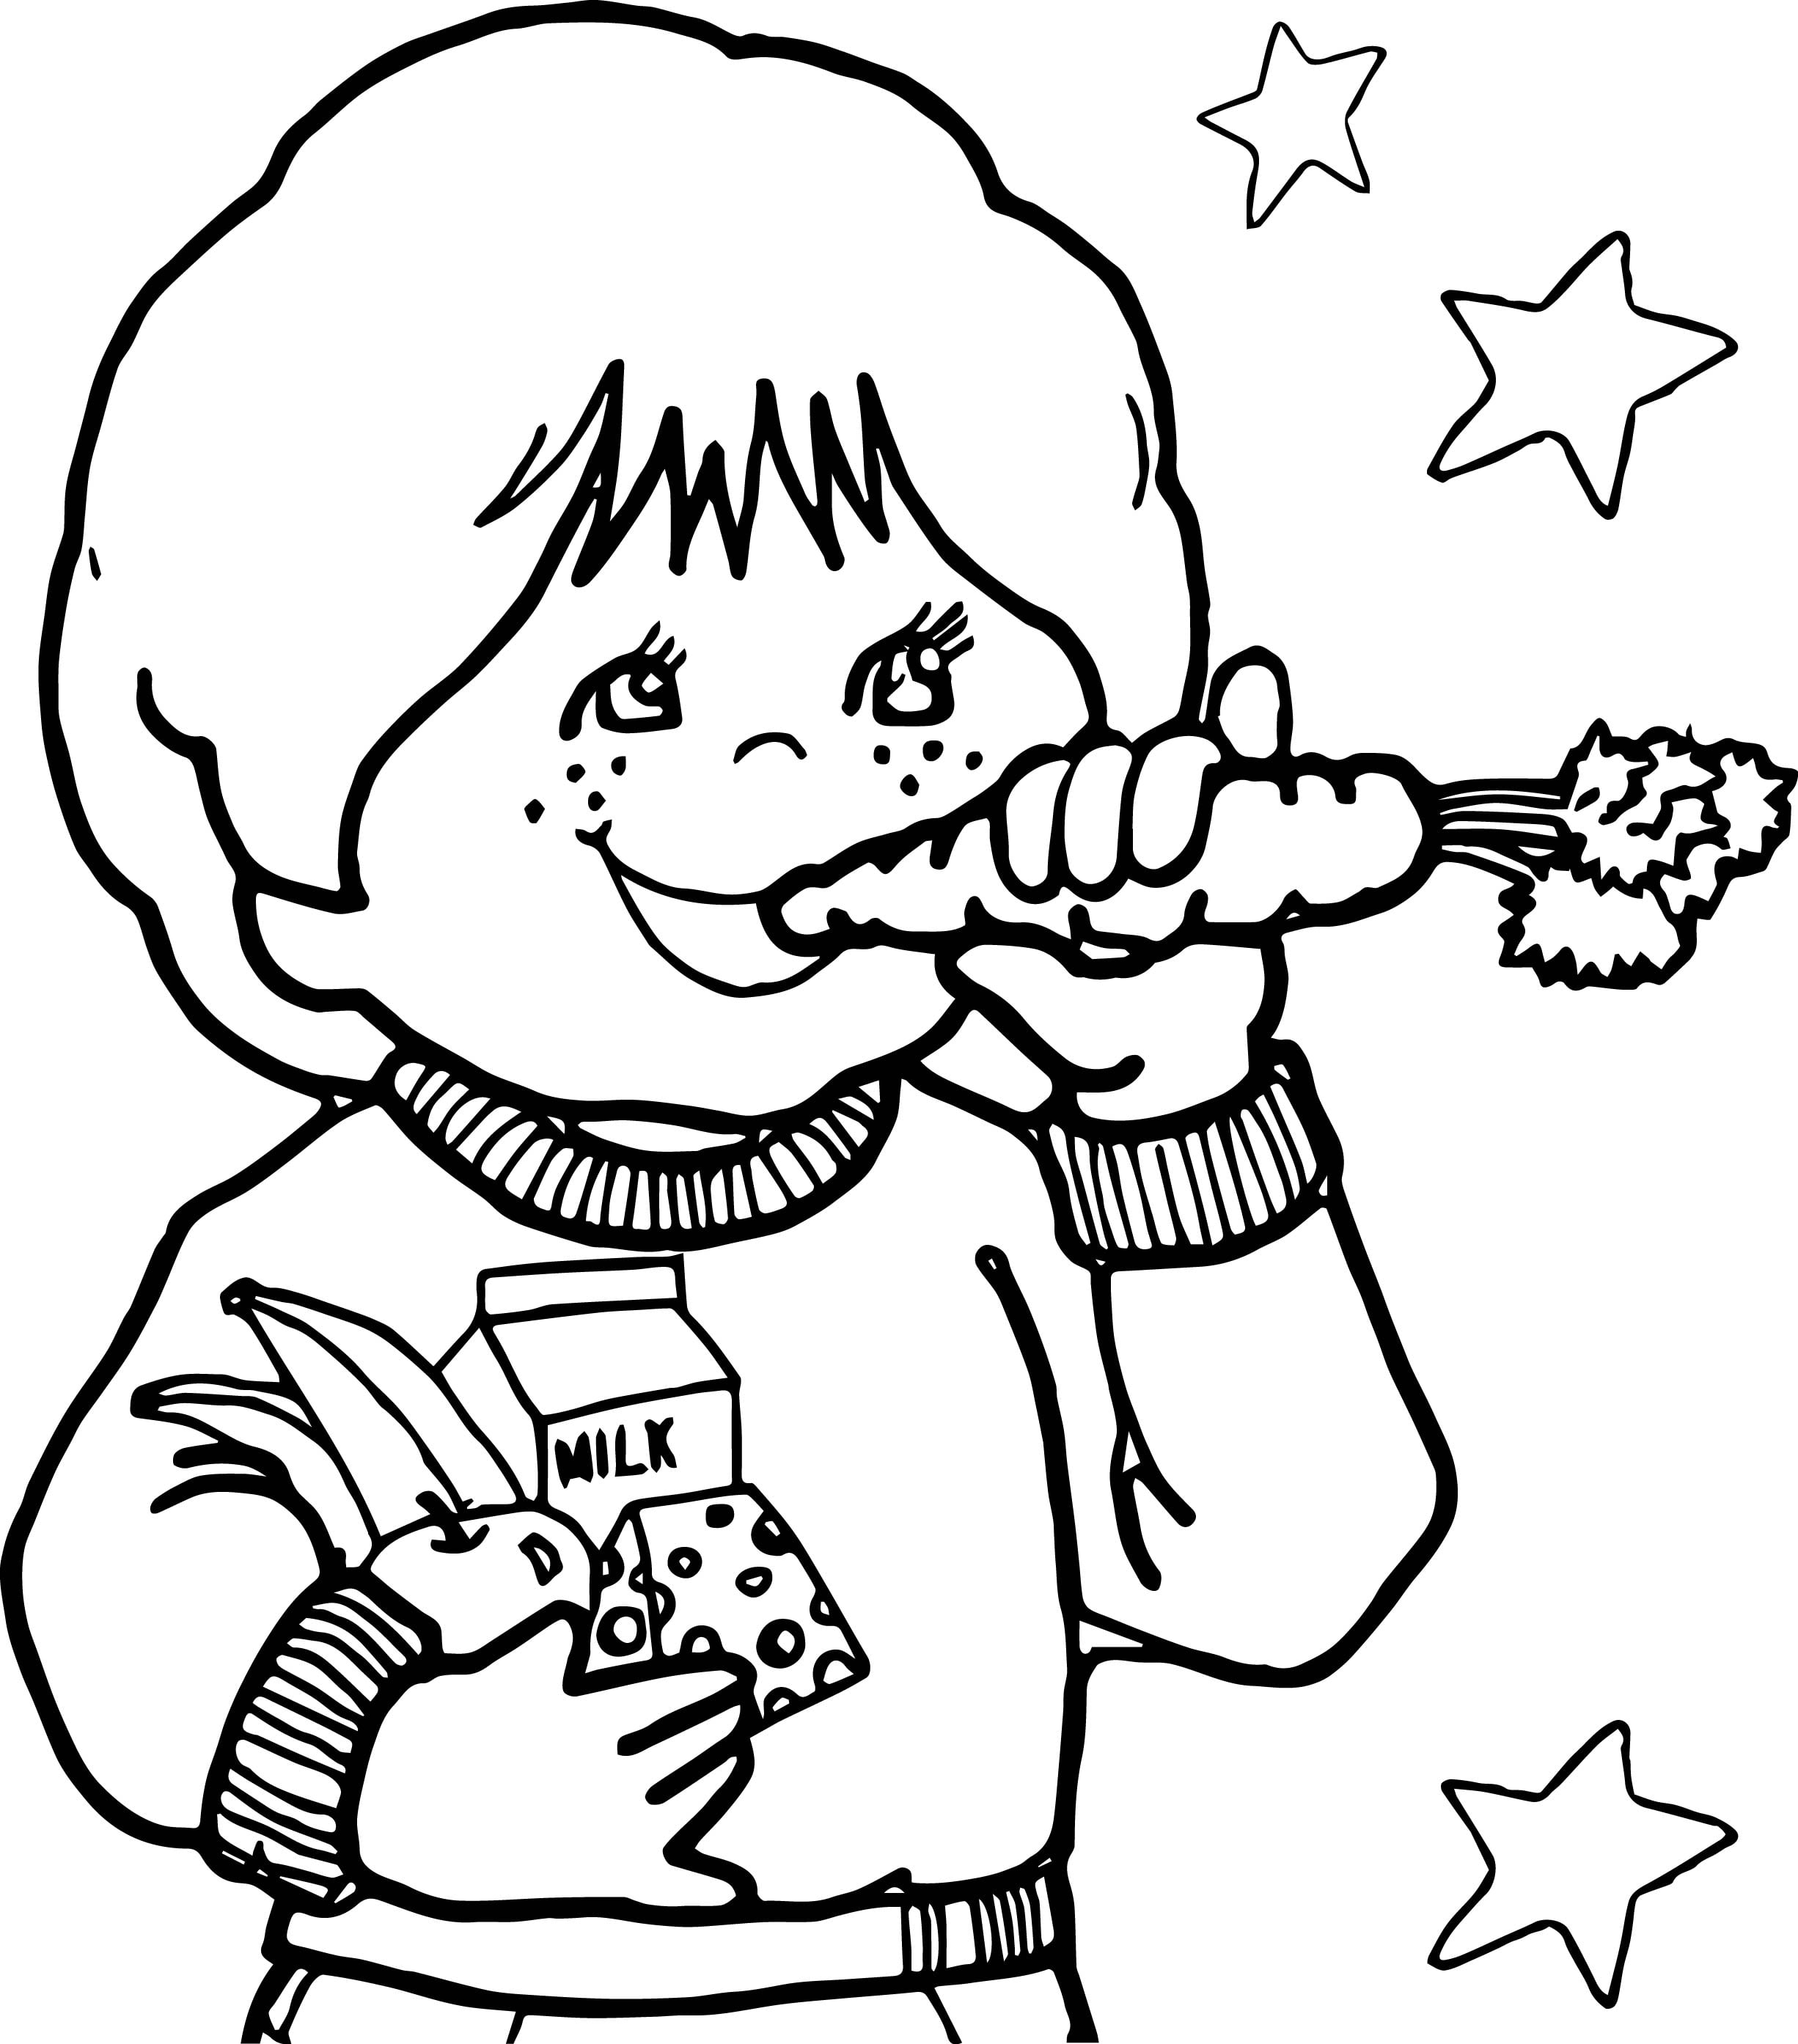 Children Eating Carrot Healthy Coloring Page